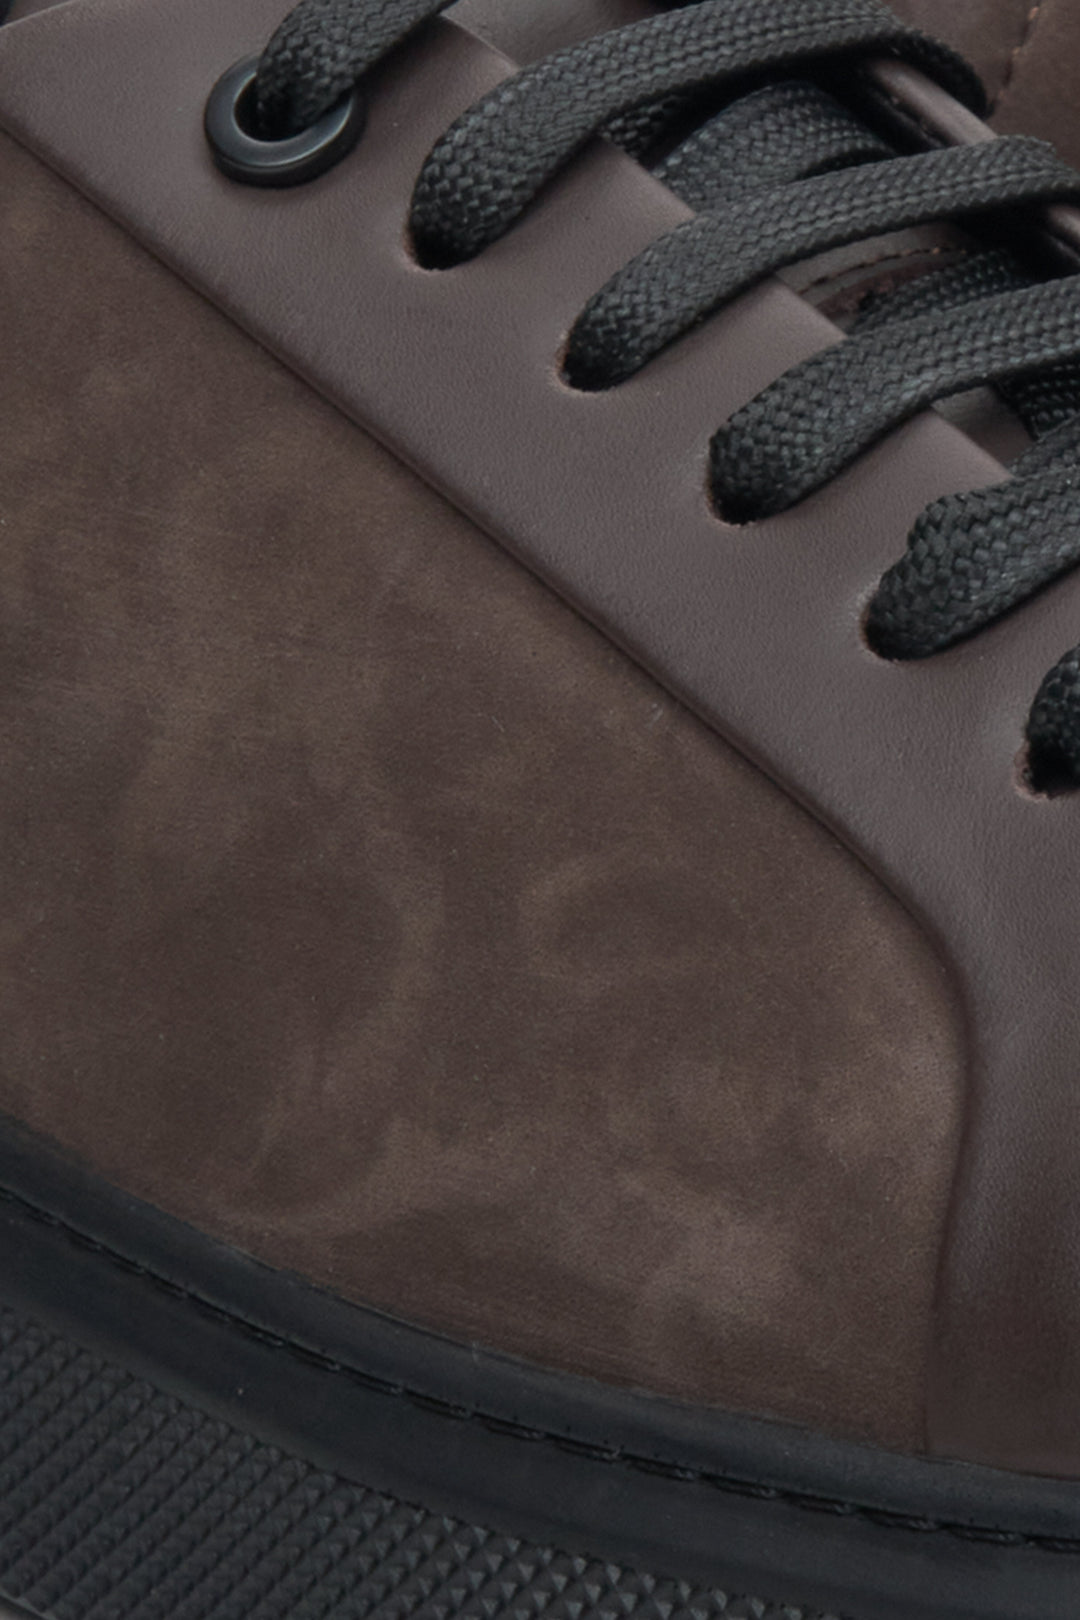 Brown velvet and leather men's sneakers by Estro - close-up on details.